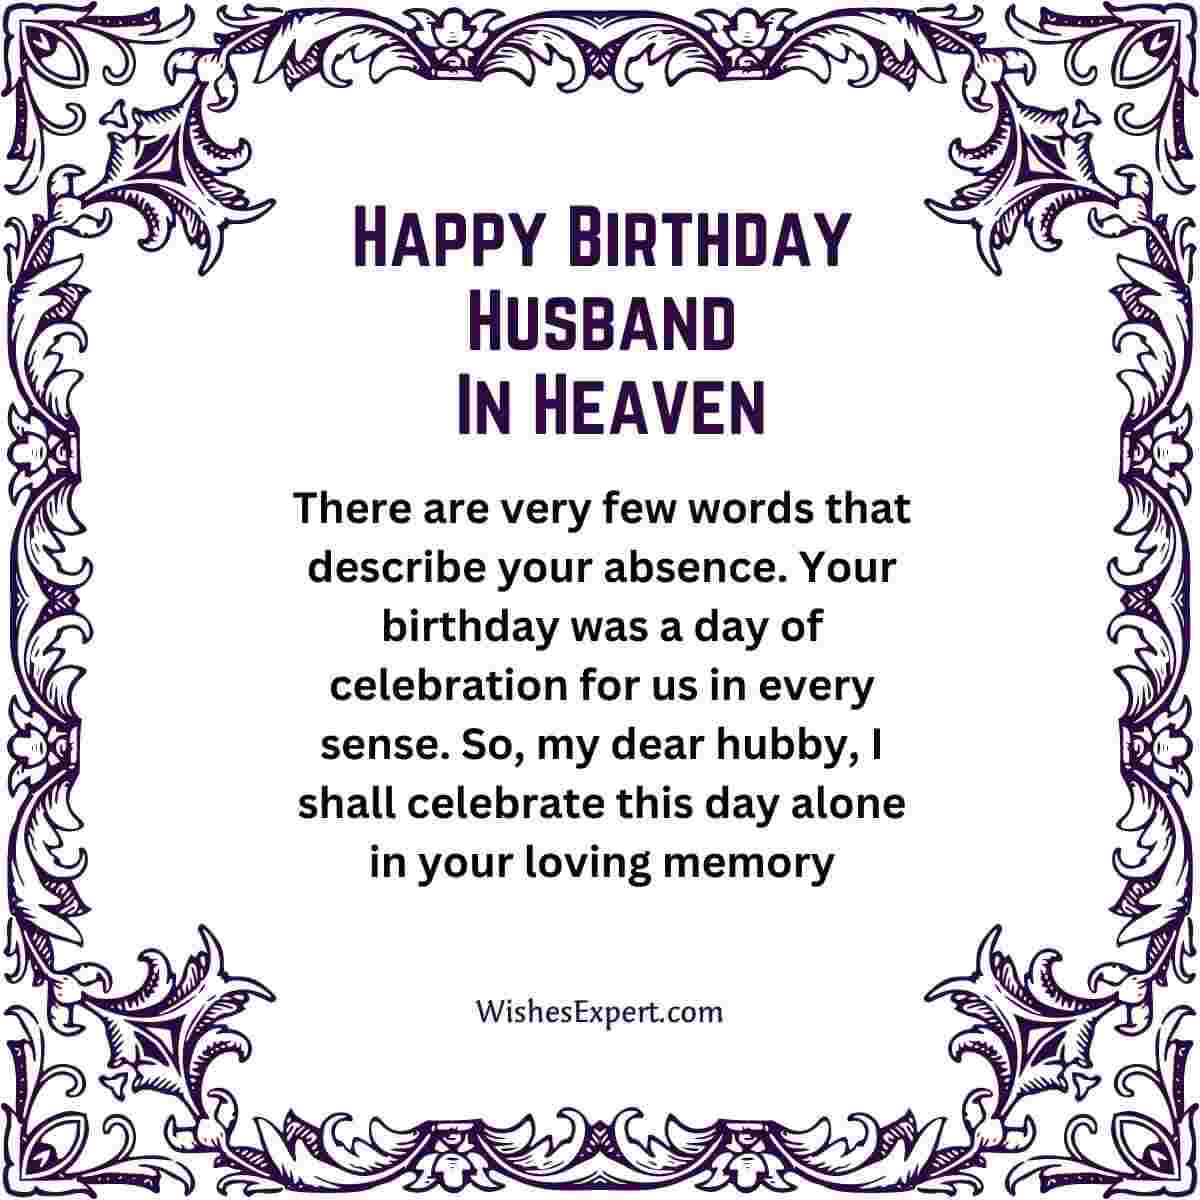 Message To My Loving Husband In Heaven